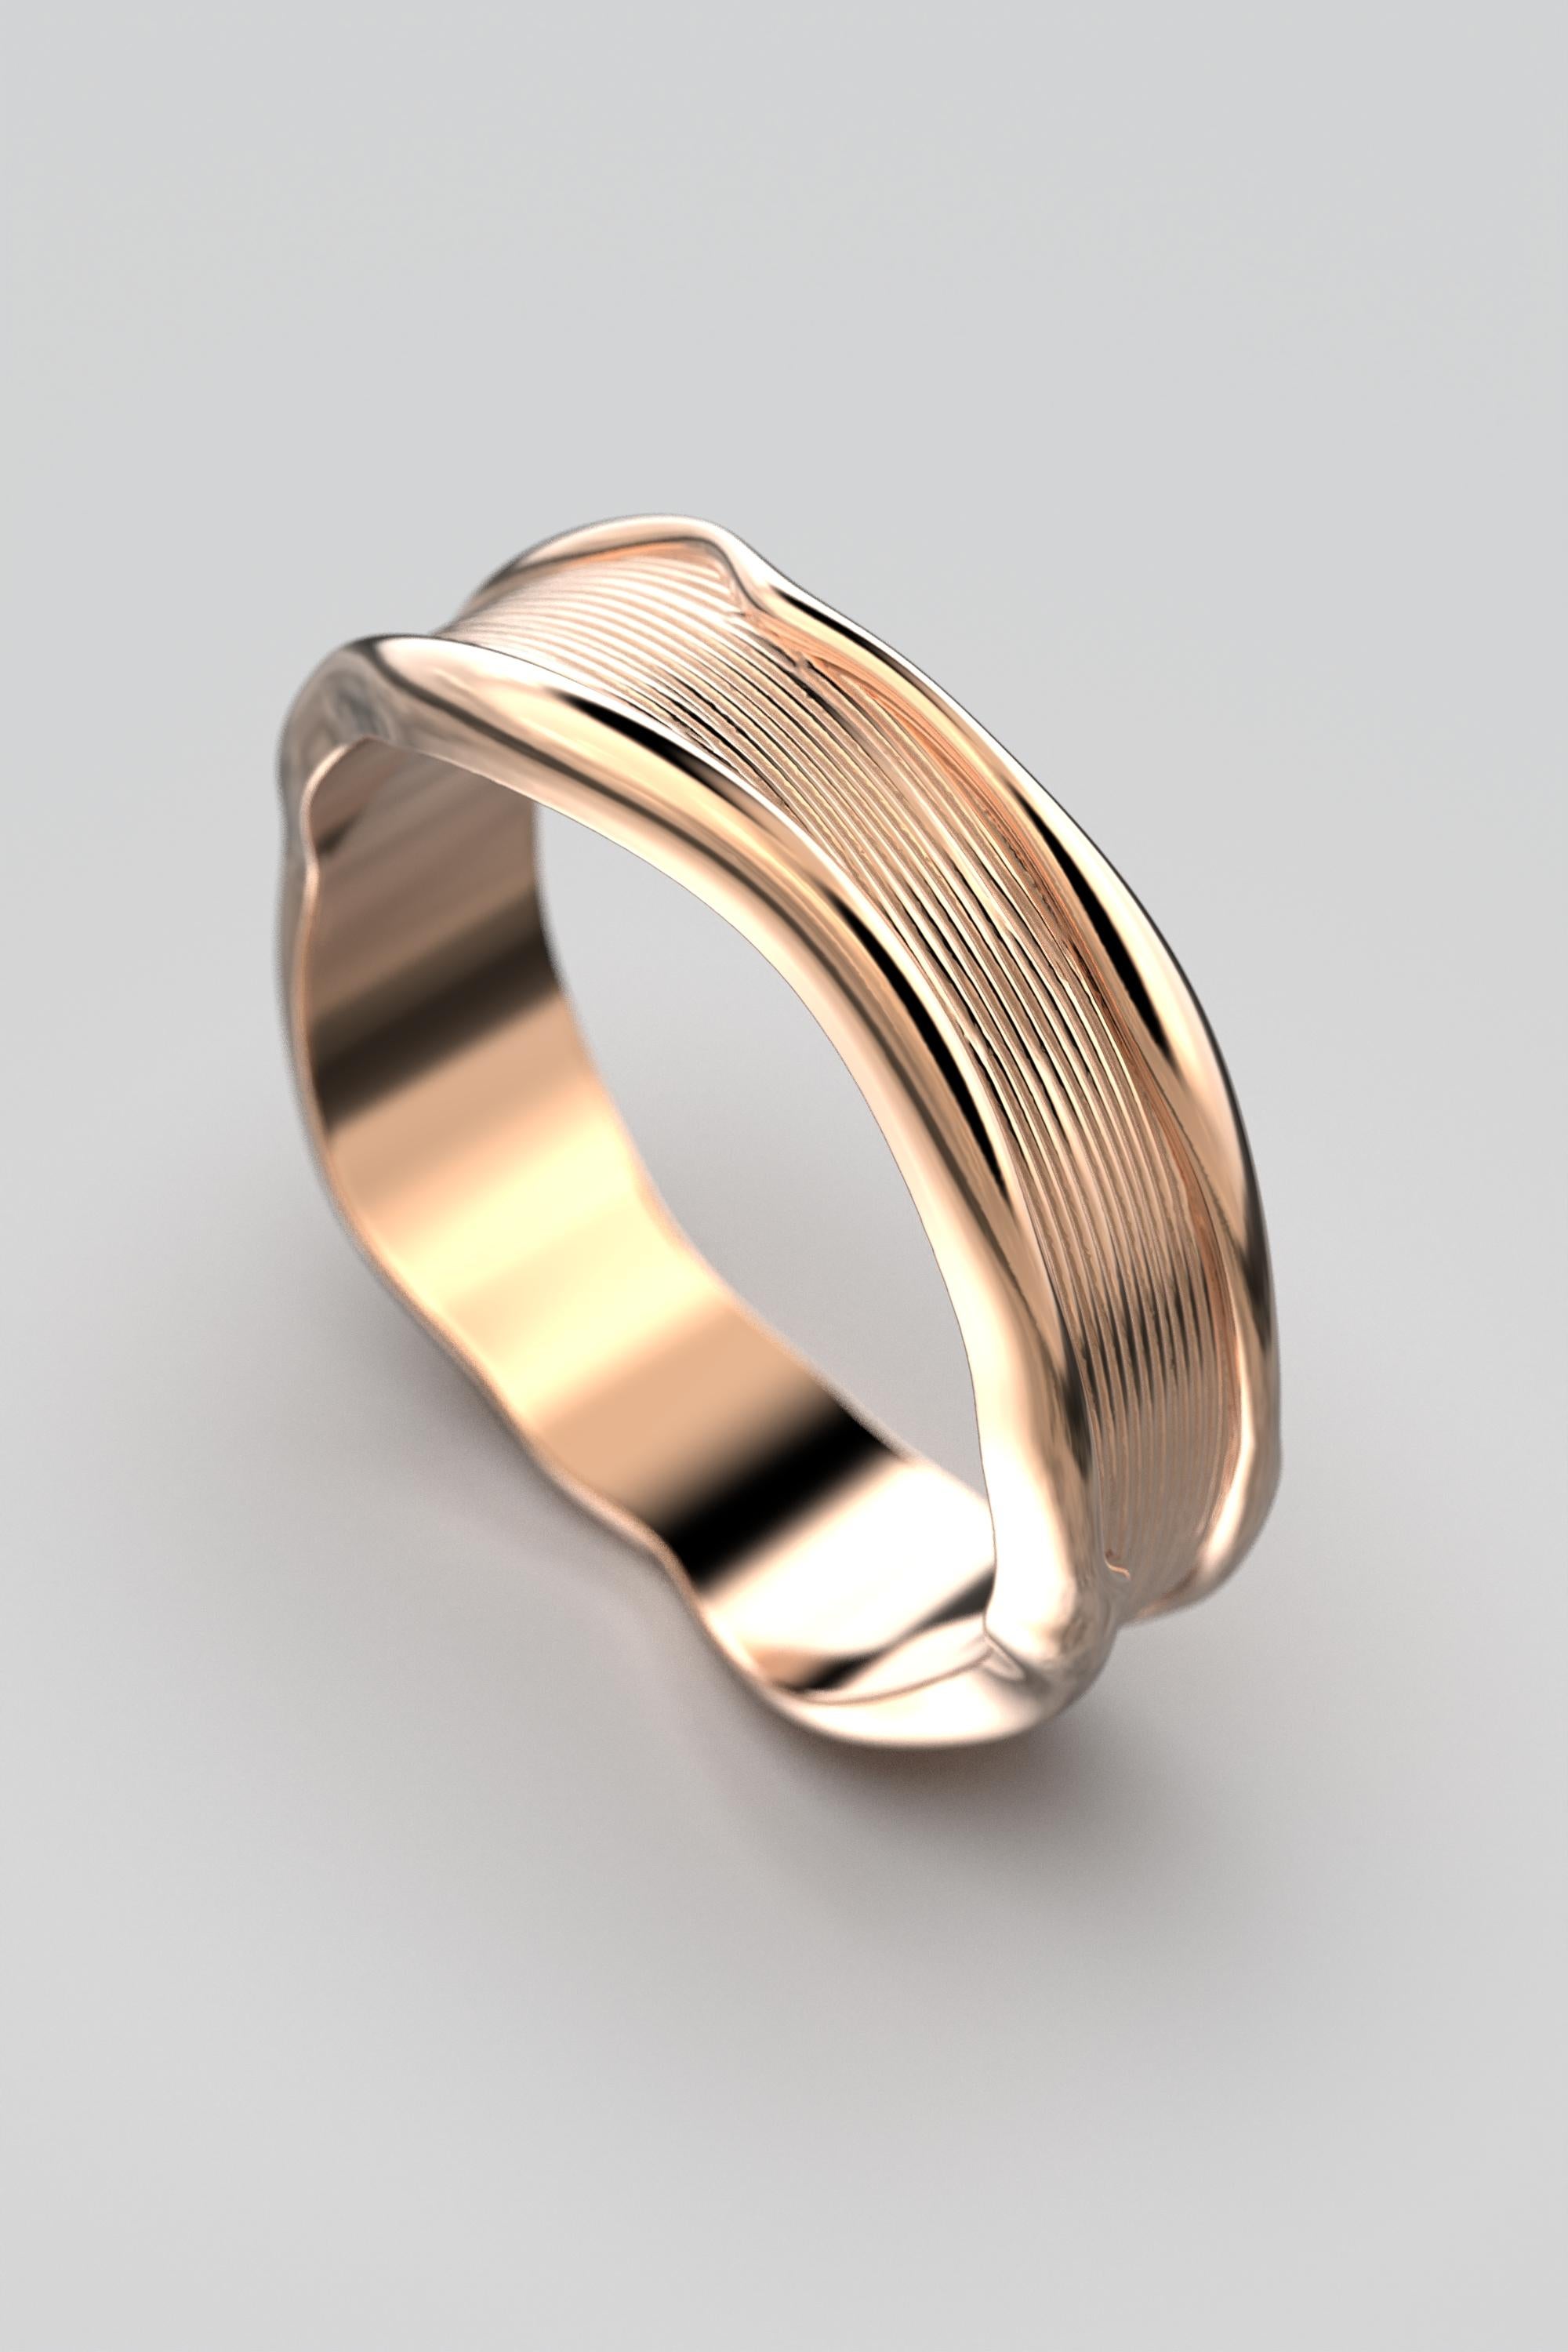 For Sale:  Unisex 18k Gold Band Ring with Hand-Engraved Organic Design Made in Italy 3